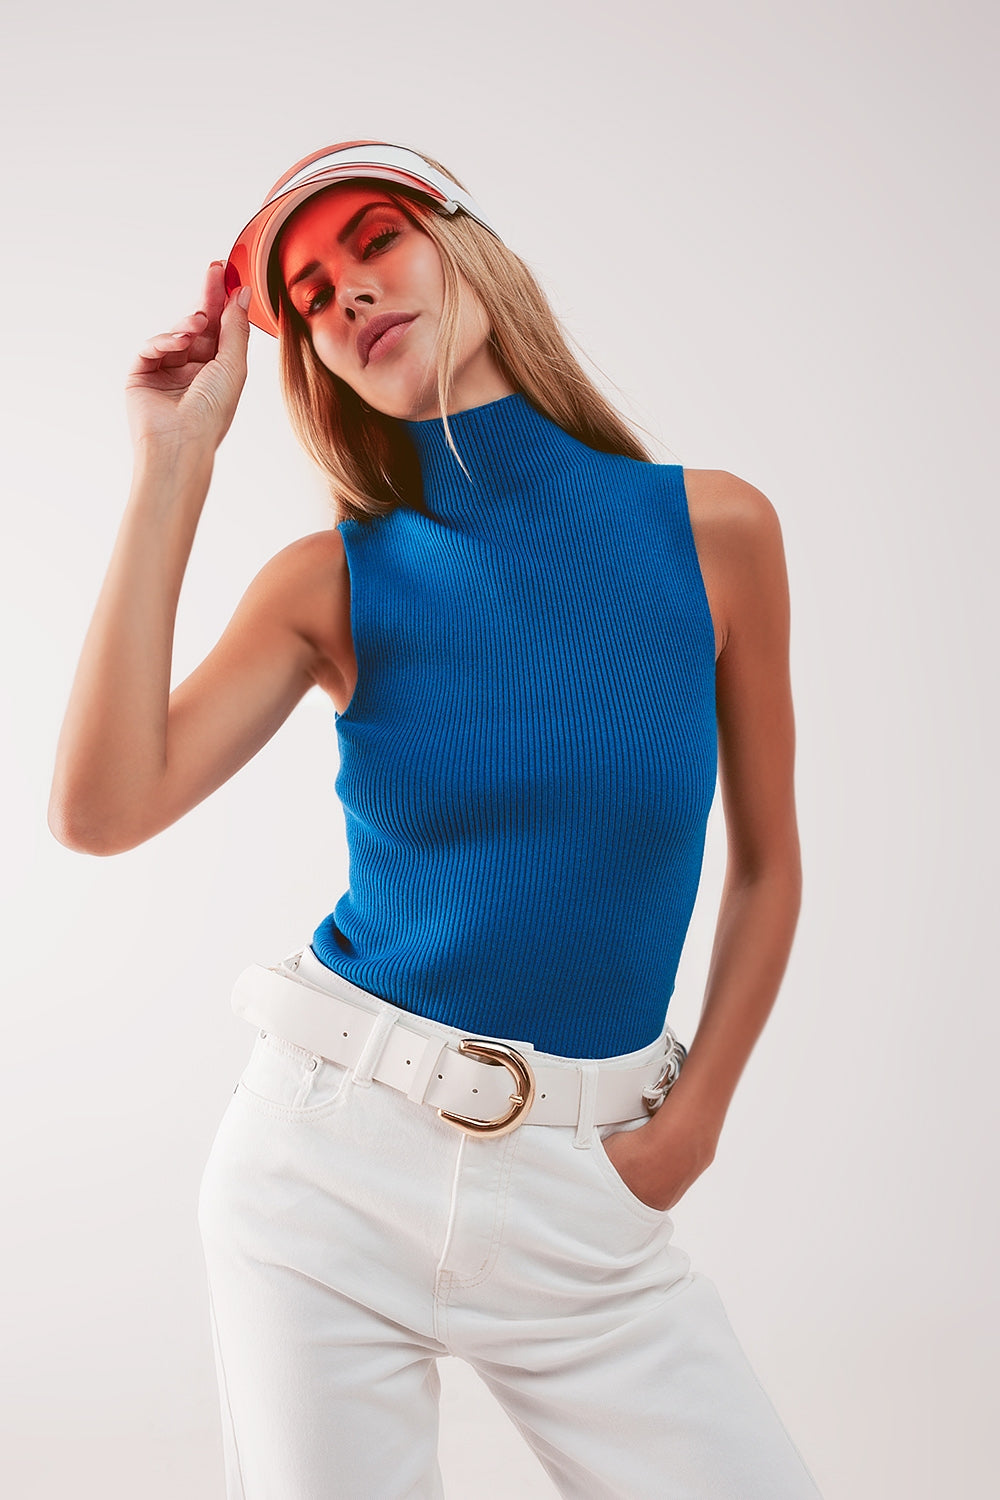 Knitted Light Blue Top Without Sleeves